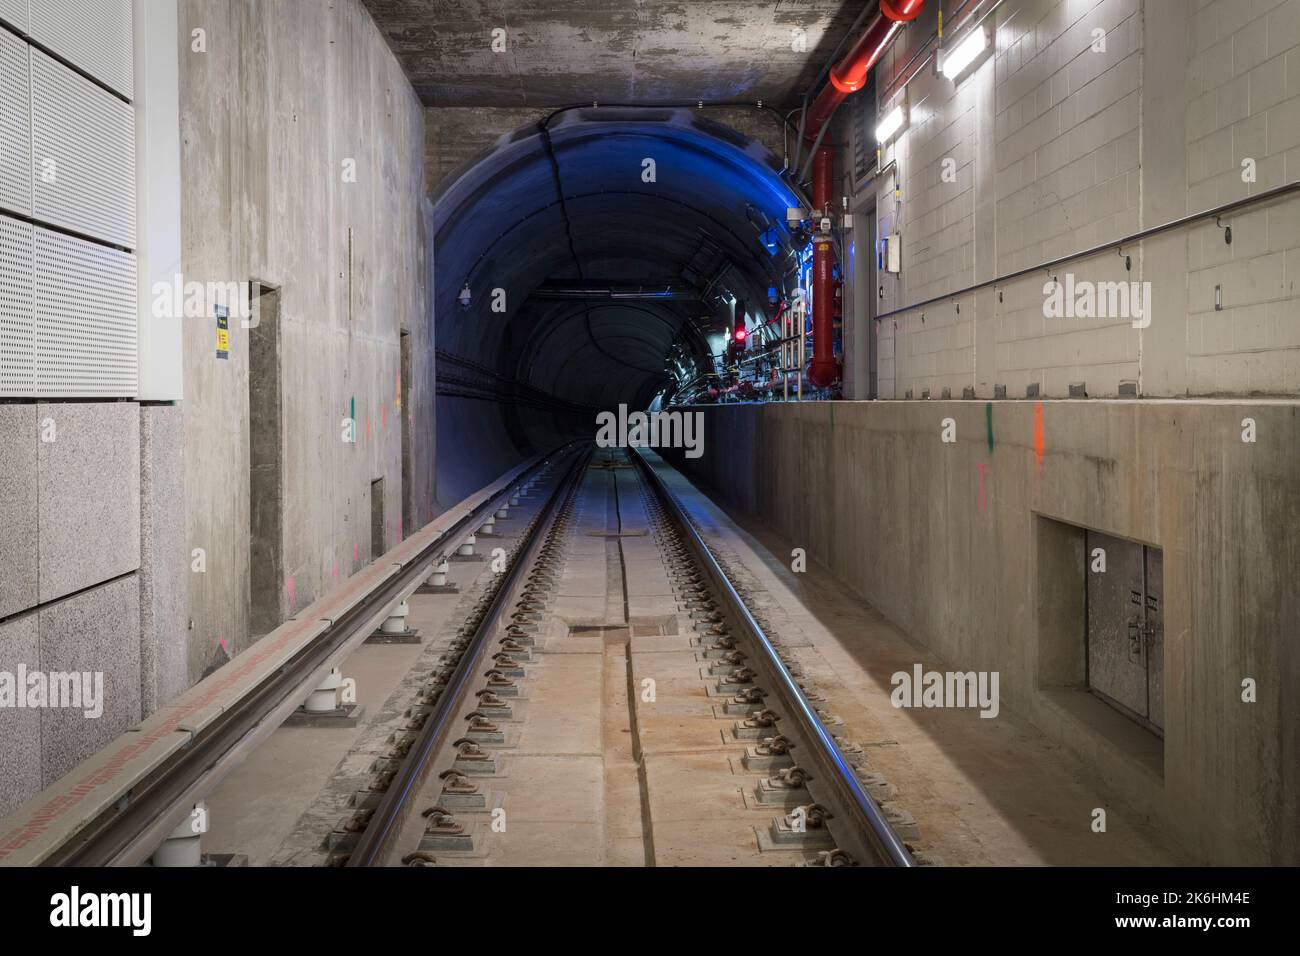 New York City Subway, view of subway tunnel from track level Stock Photo